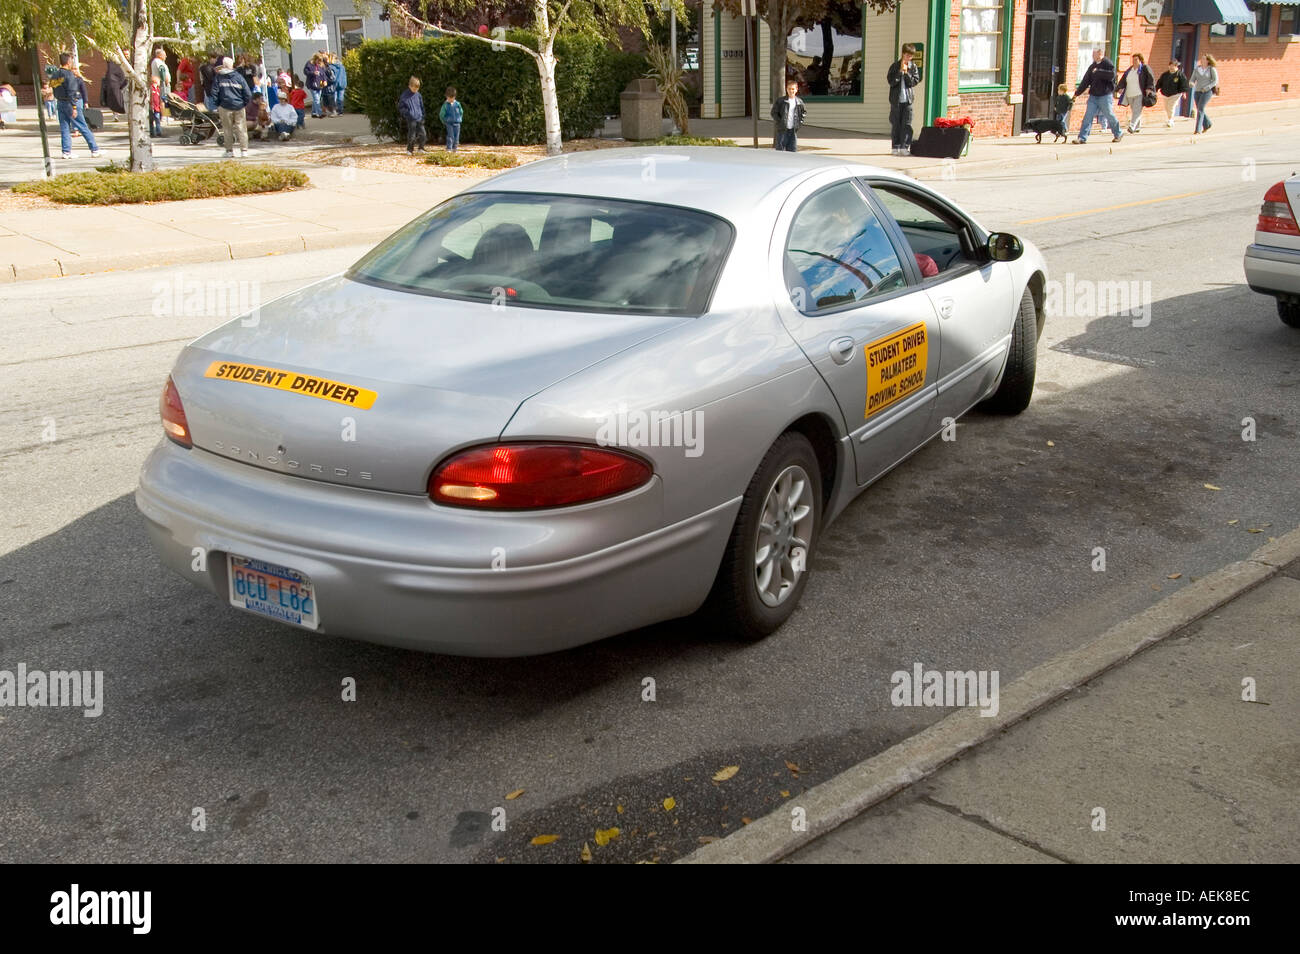 Teen student driver learns to parallel park a car Stock Photo